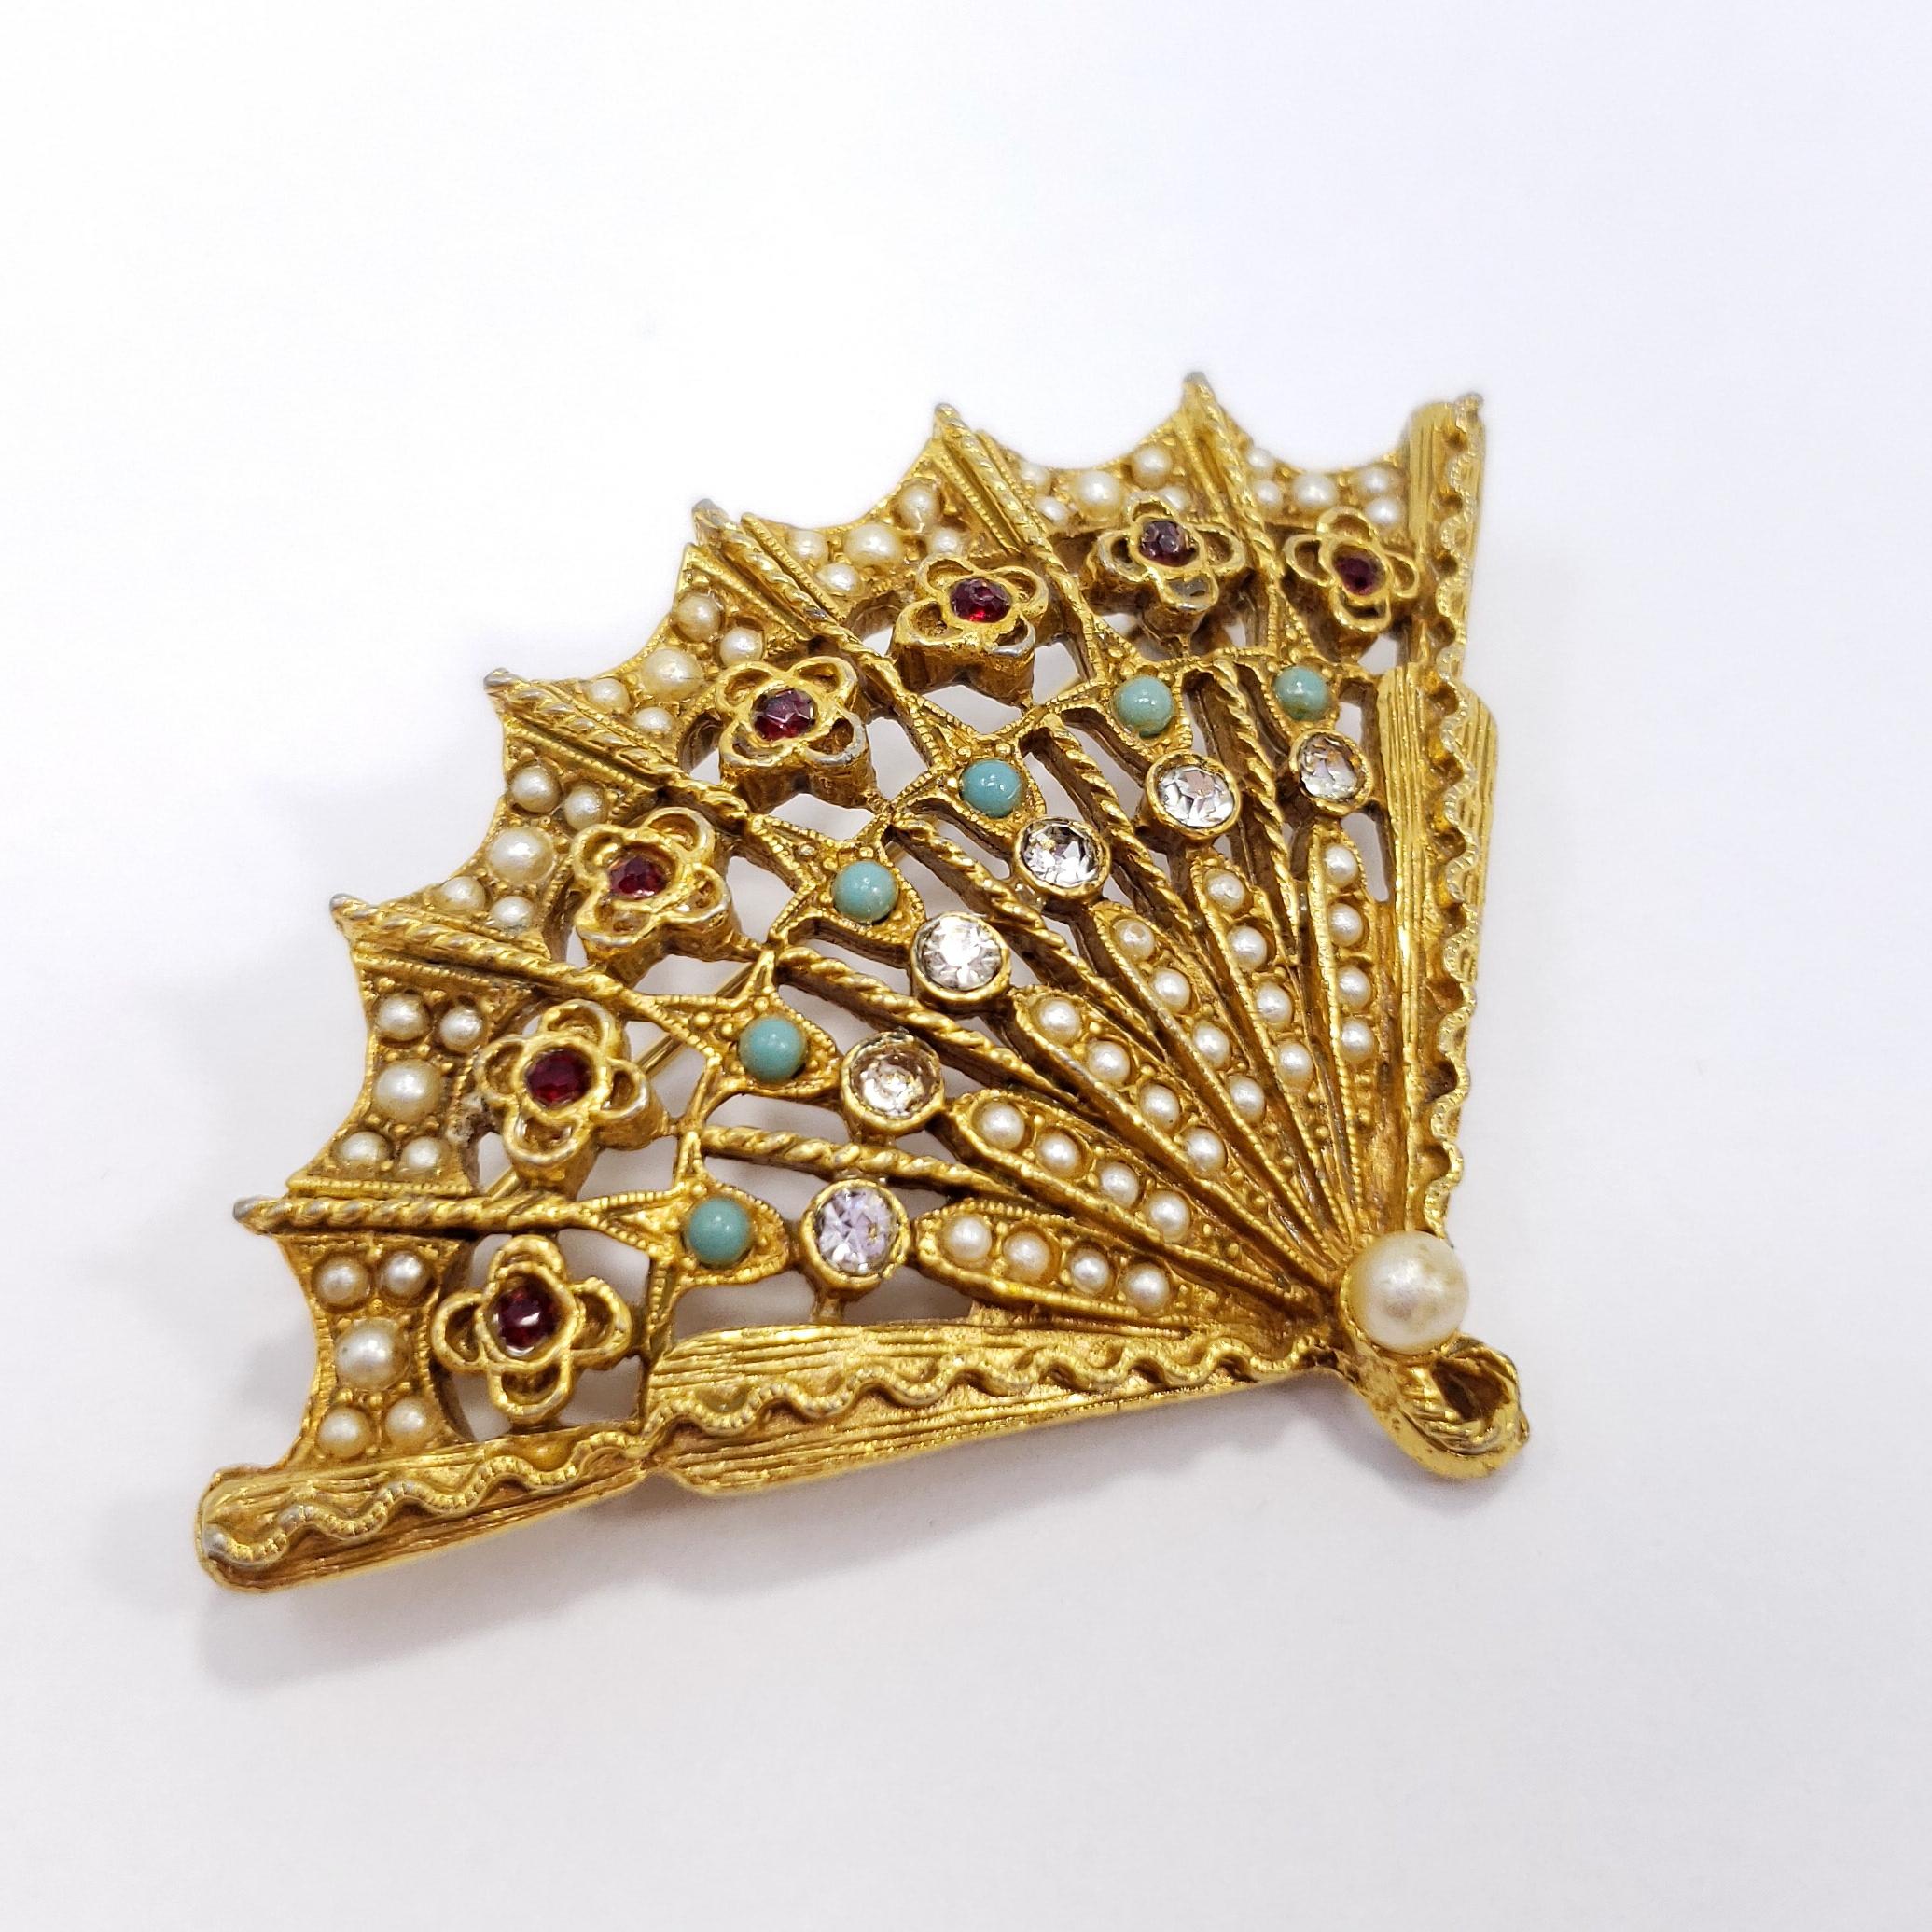 Stylish folding fan pin-brooch, decorated with faux pearls, jade beads, and crystals. By Arthur Pepper (ART). 

Marks / hallmarks / etc: ART